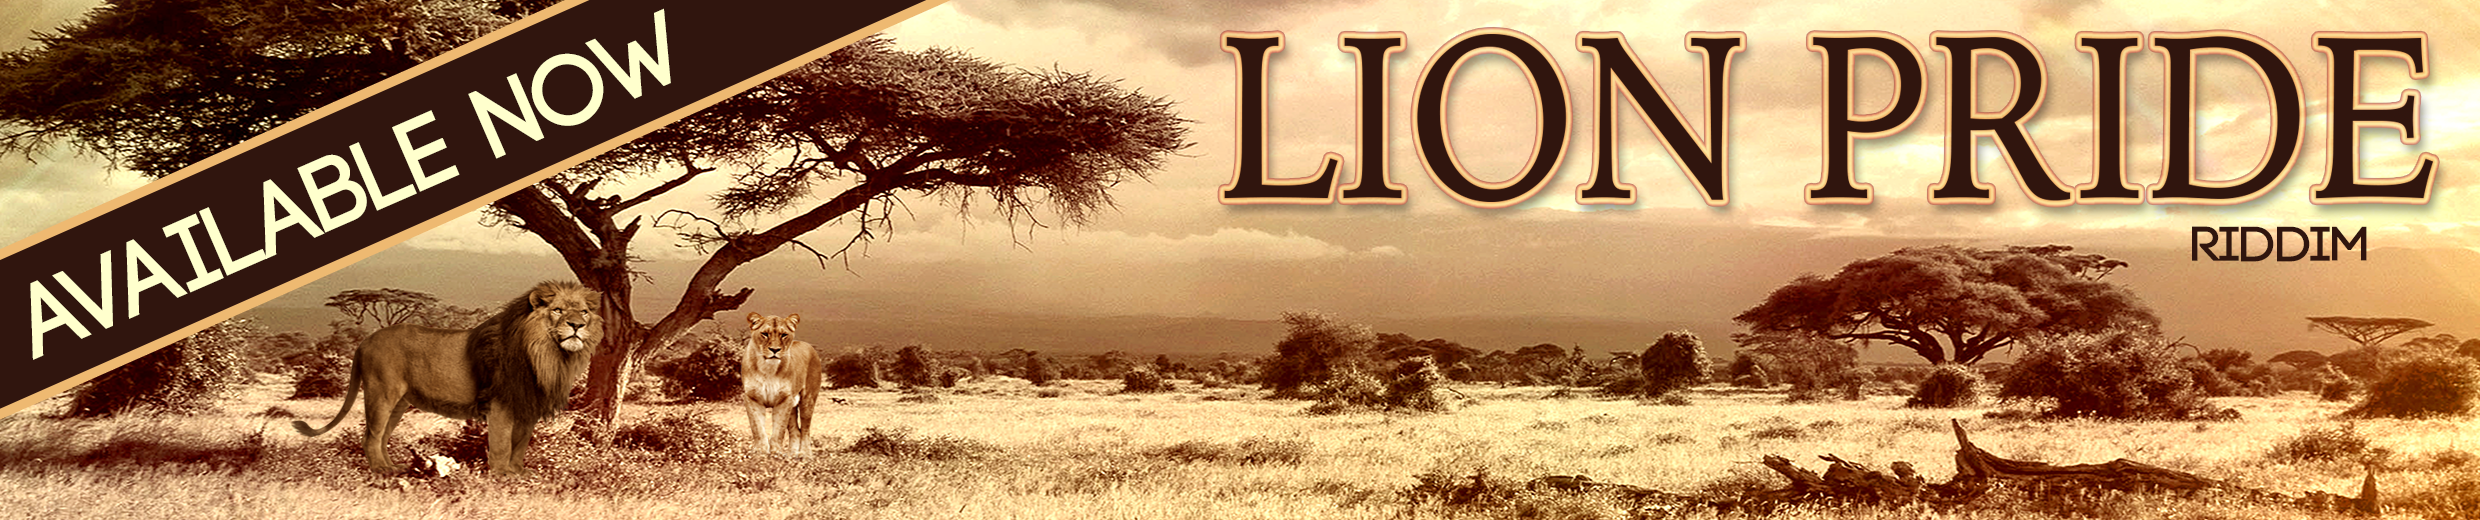 Lion-Pride-Riddim-AVAILABLE-NOW-Banner